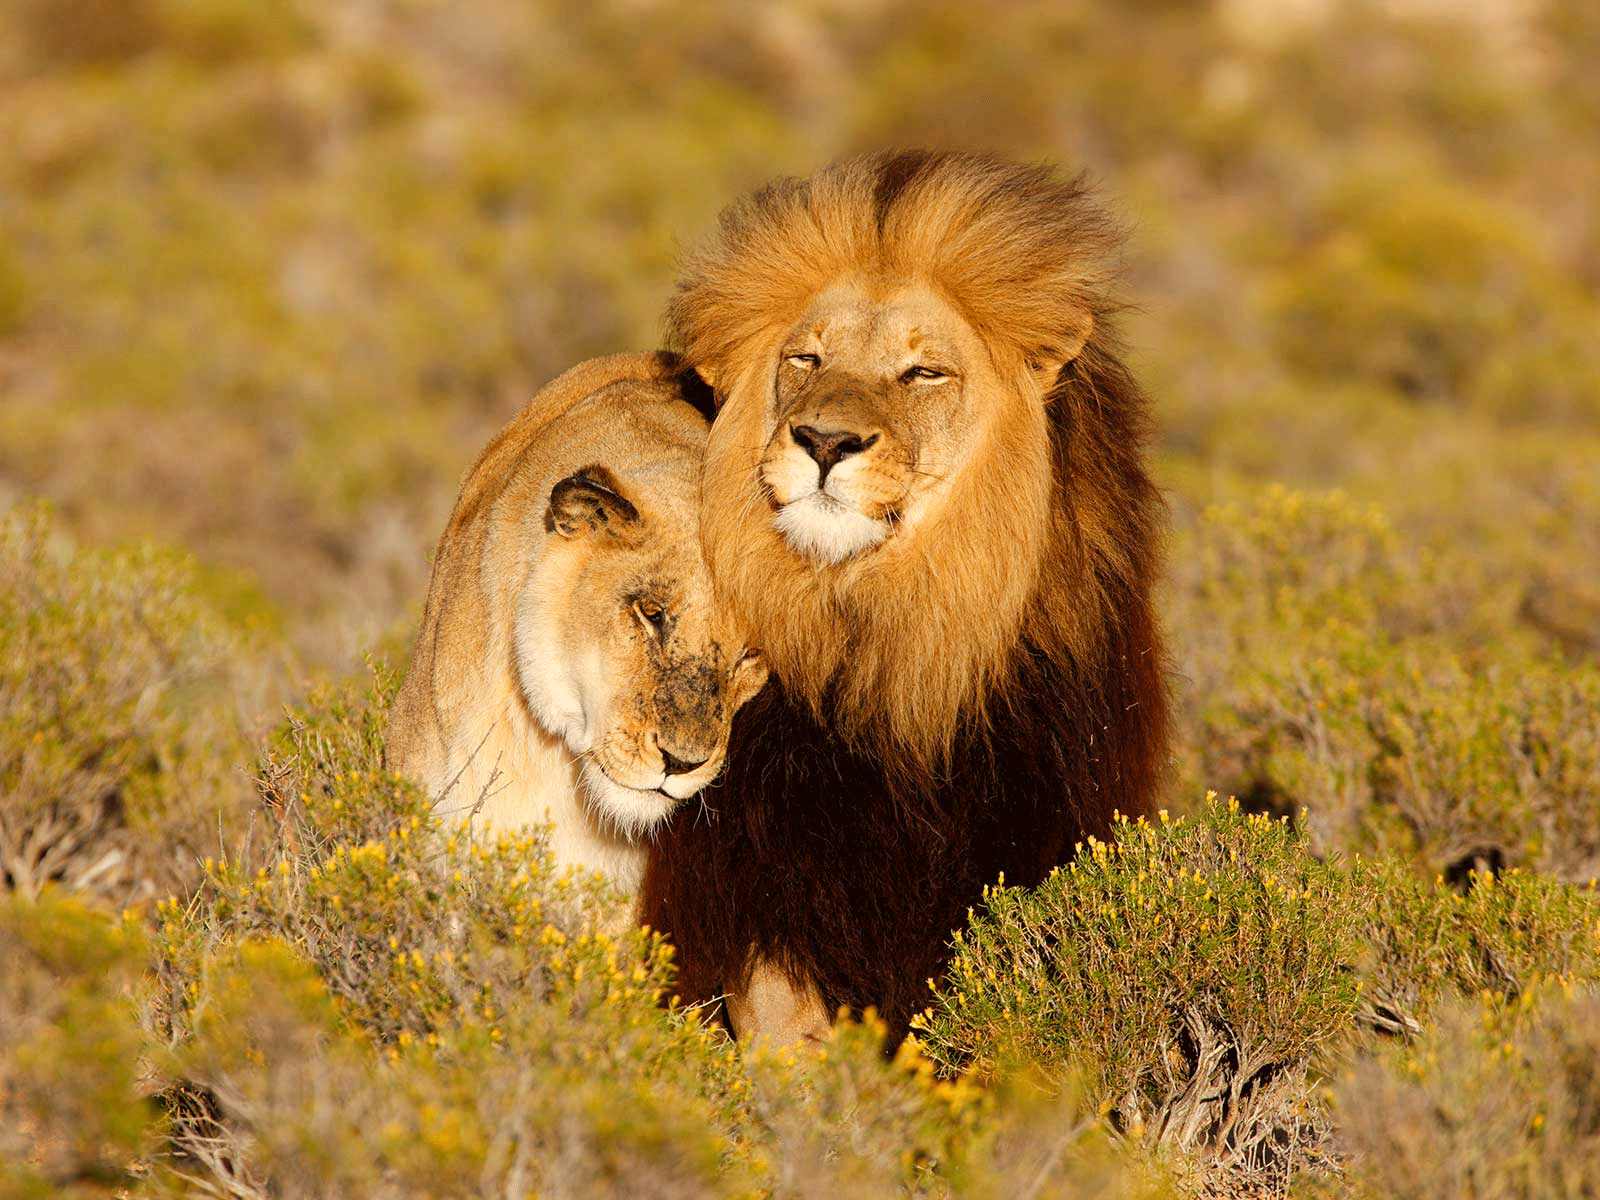 Can Spraying Lions With the 'Love Hormone' Help Them Live Together? |  Science| Smithsonian Magazine